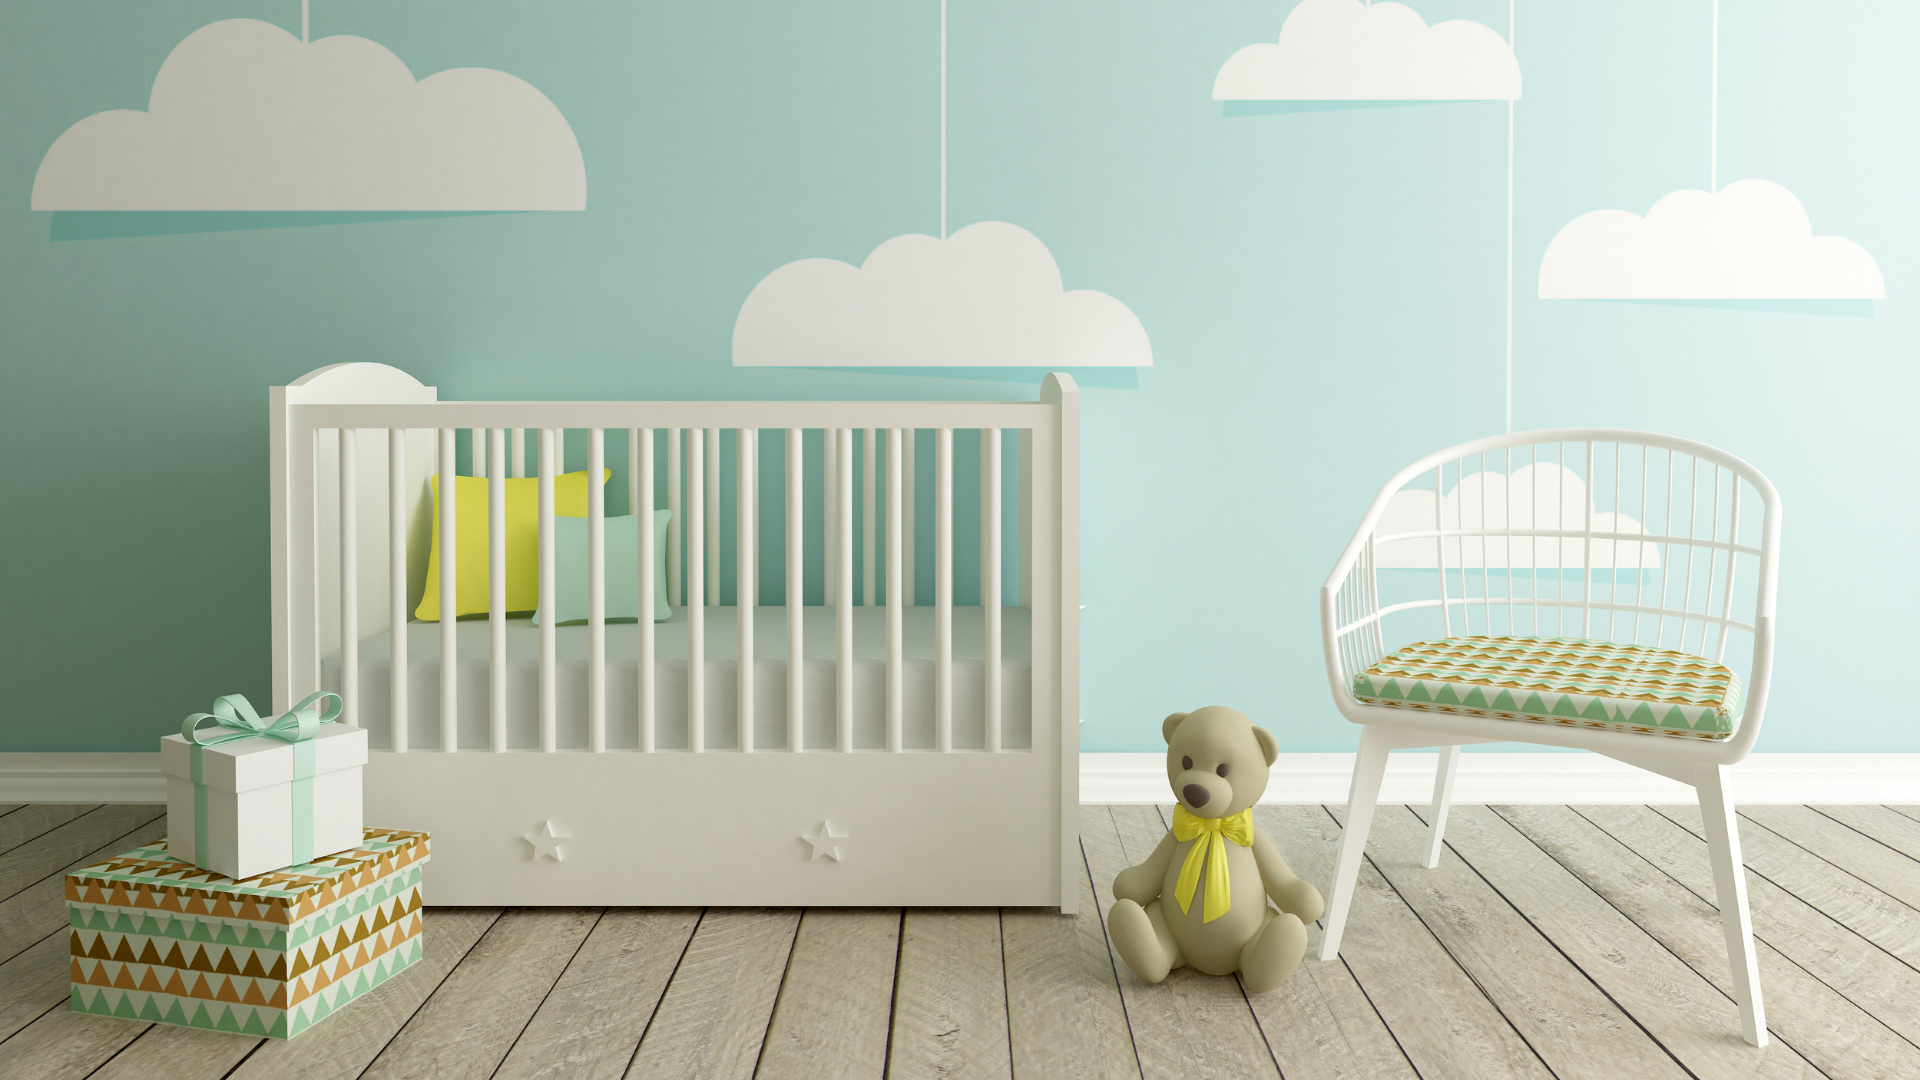 A baby nursery featuring blue walls with painted clouds, a white crib, a white chair and some baby toys/books. 